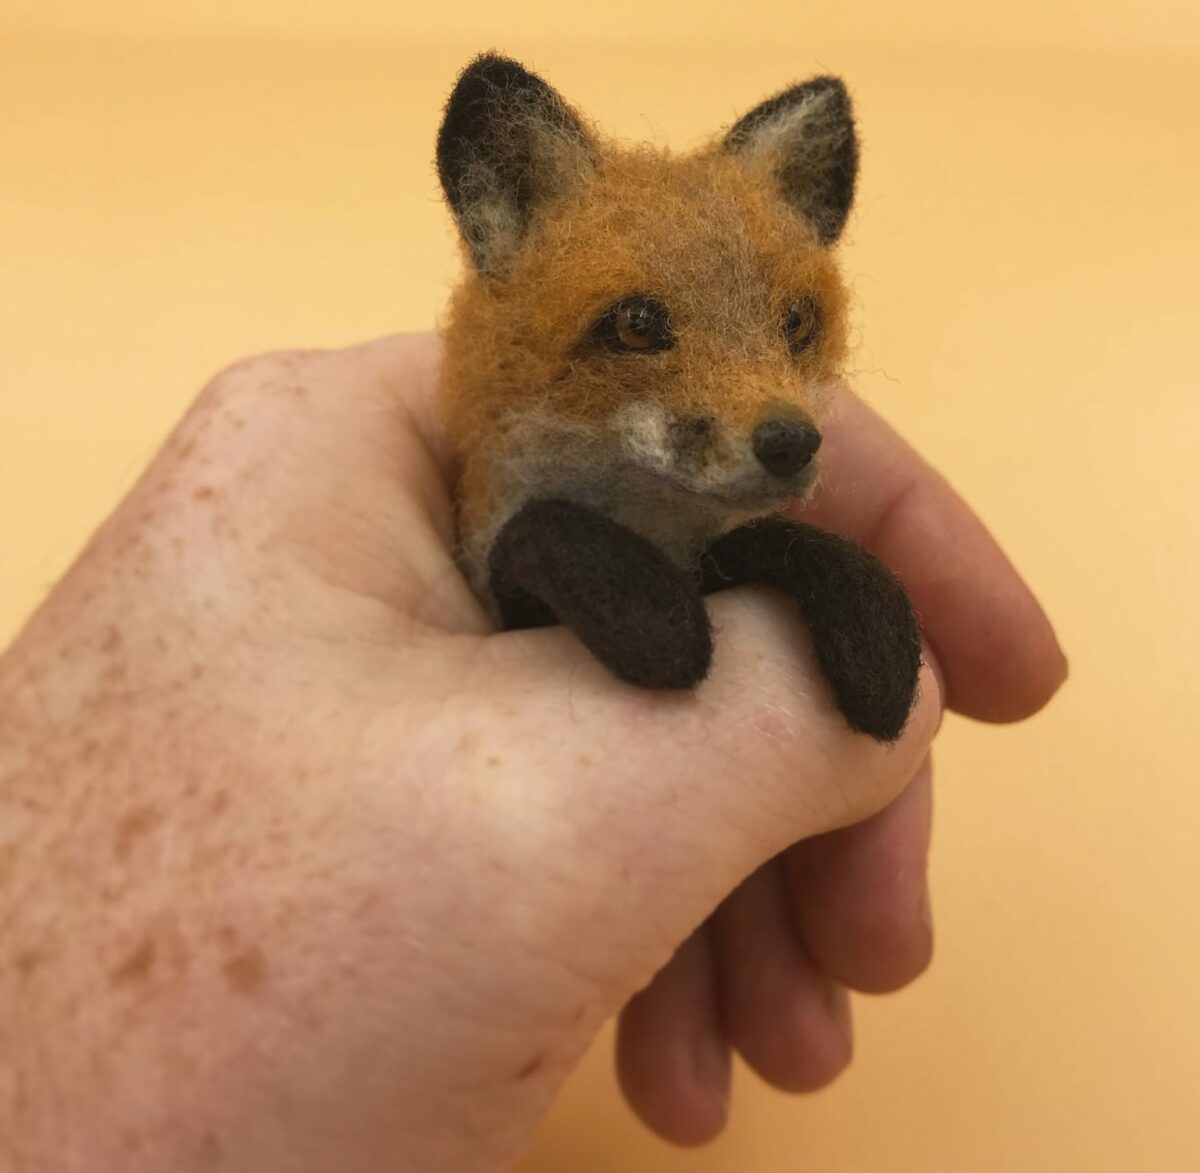 Felted Wildlife Gorgeous Miniature Animal Sculptures By Simon Brown And Katie Corrigan 4